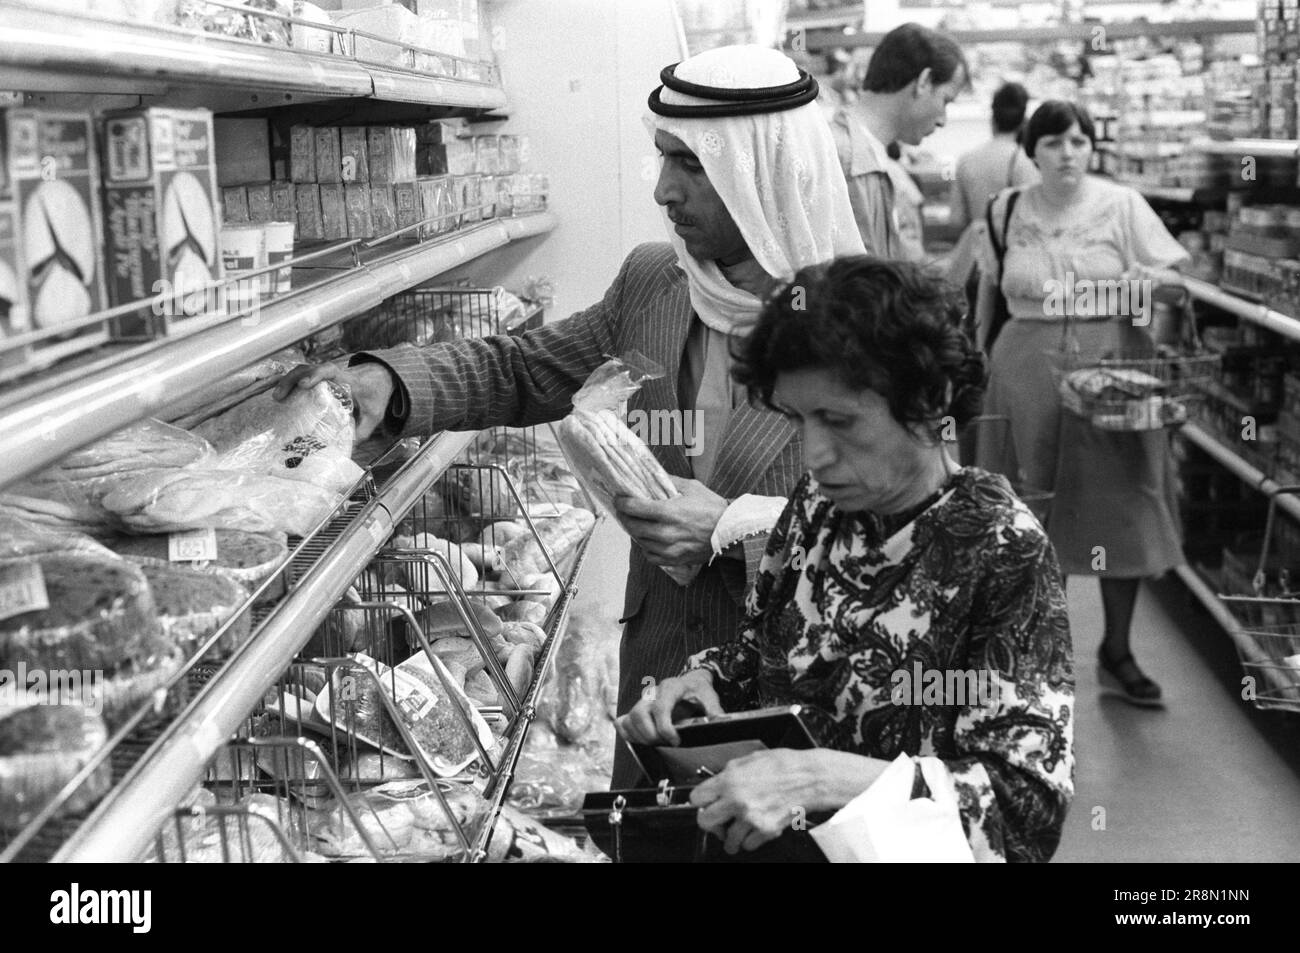 Poor Arabs in London Food Shopping 1970s UK . During the late 1970s Middle Eastern governments provided healthcare for their nationals in London, many stayed in bedsit cheap accommodation in the Earls Court area. A couple grocery shopping the man is buying Pita is a flatbread. Earls Court, London, England circa 1977 70s HOMER SYKES Stock Photo